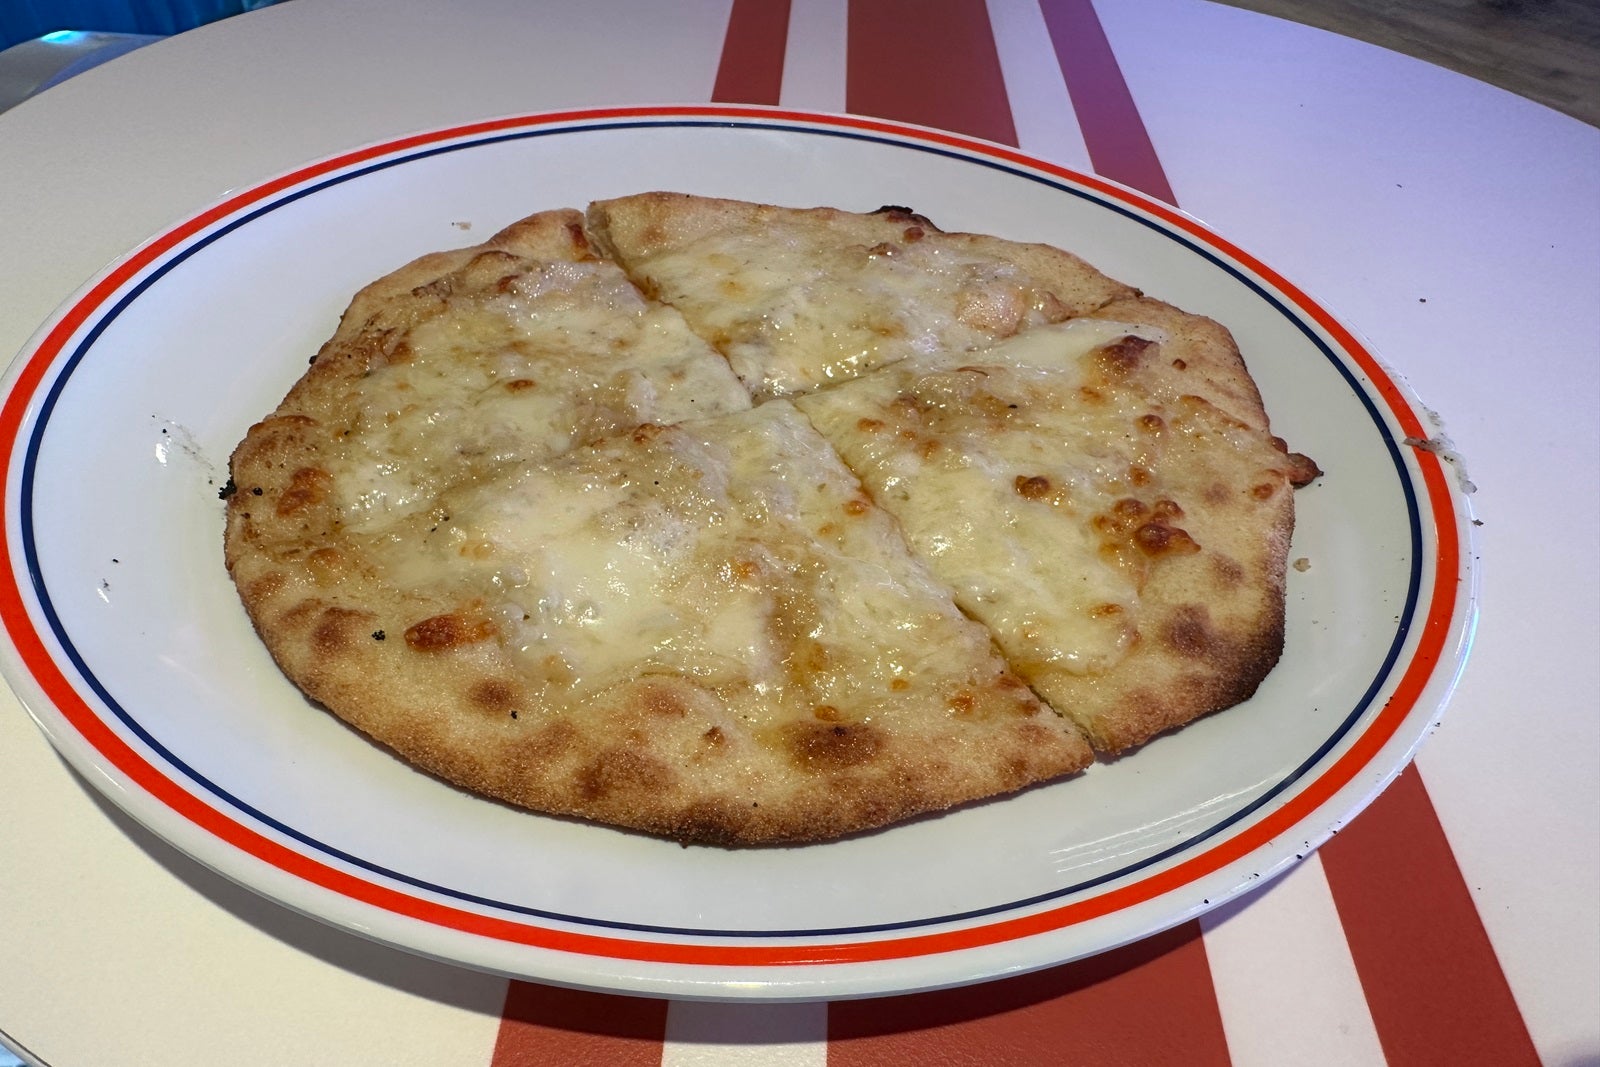 A small cheese pizza on a white plate